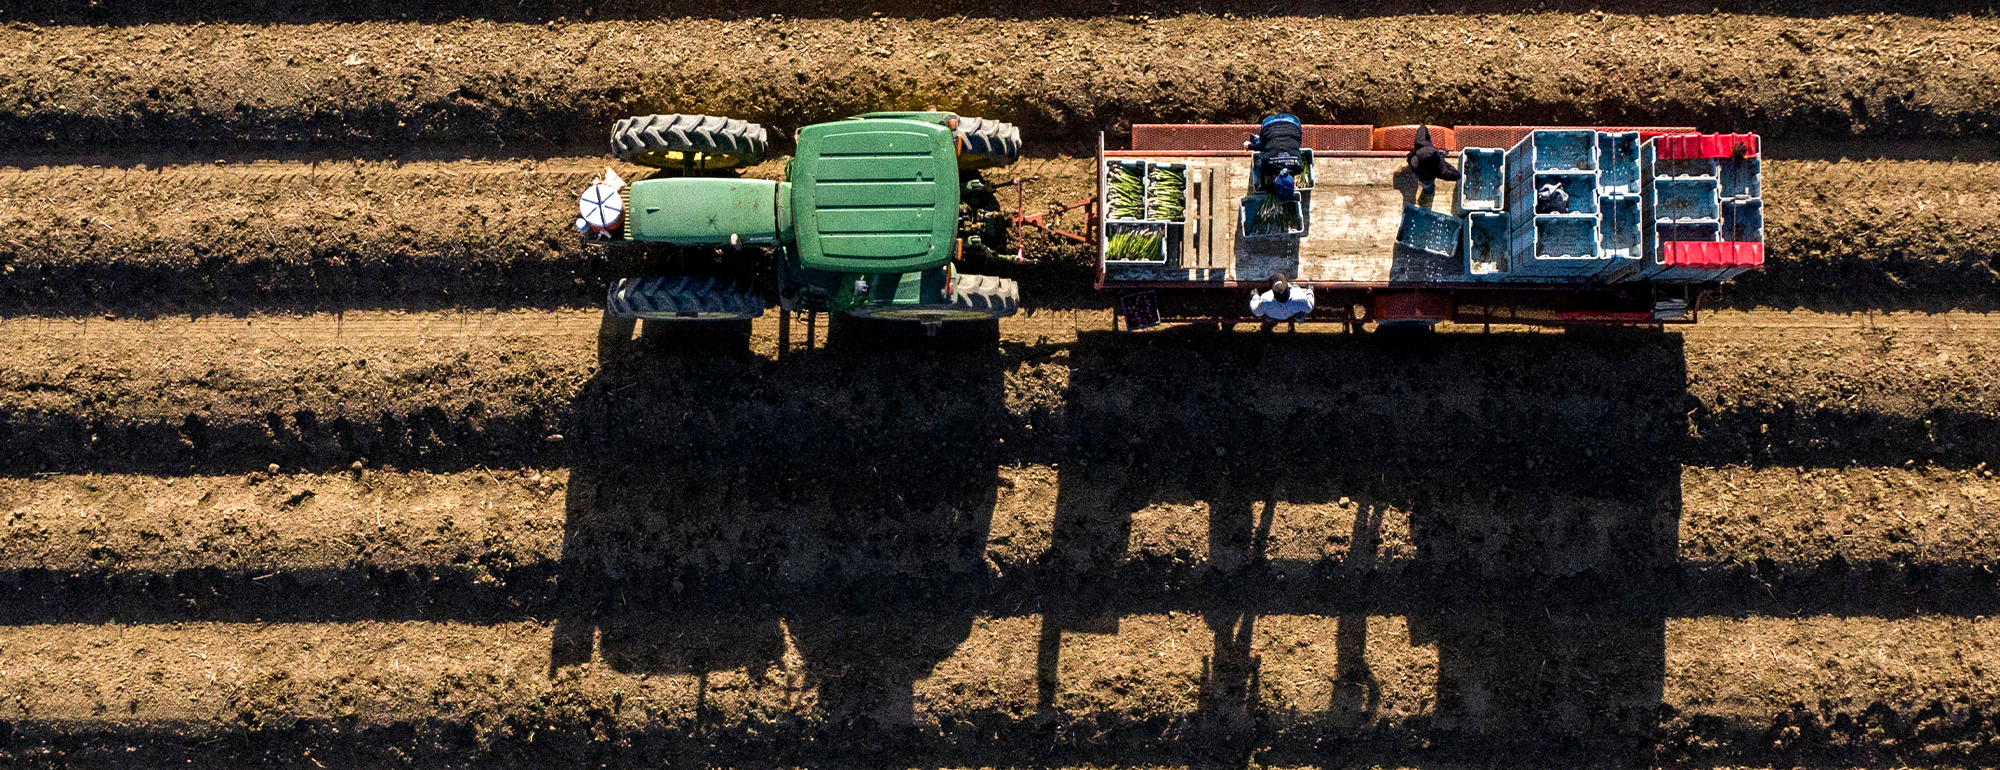 Aerial view of tractor in a field